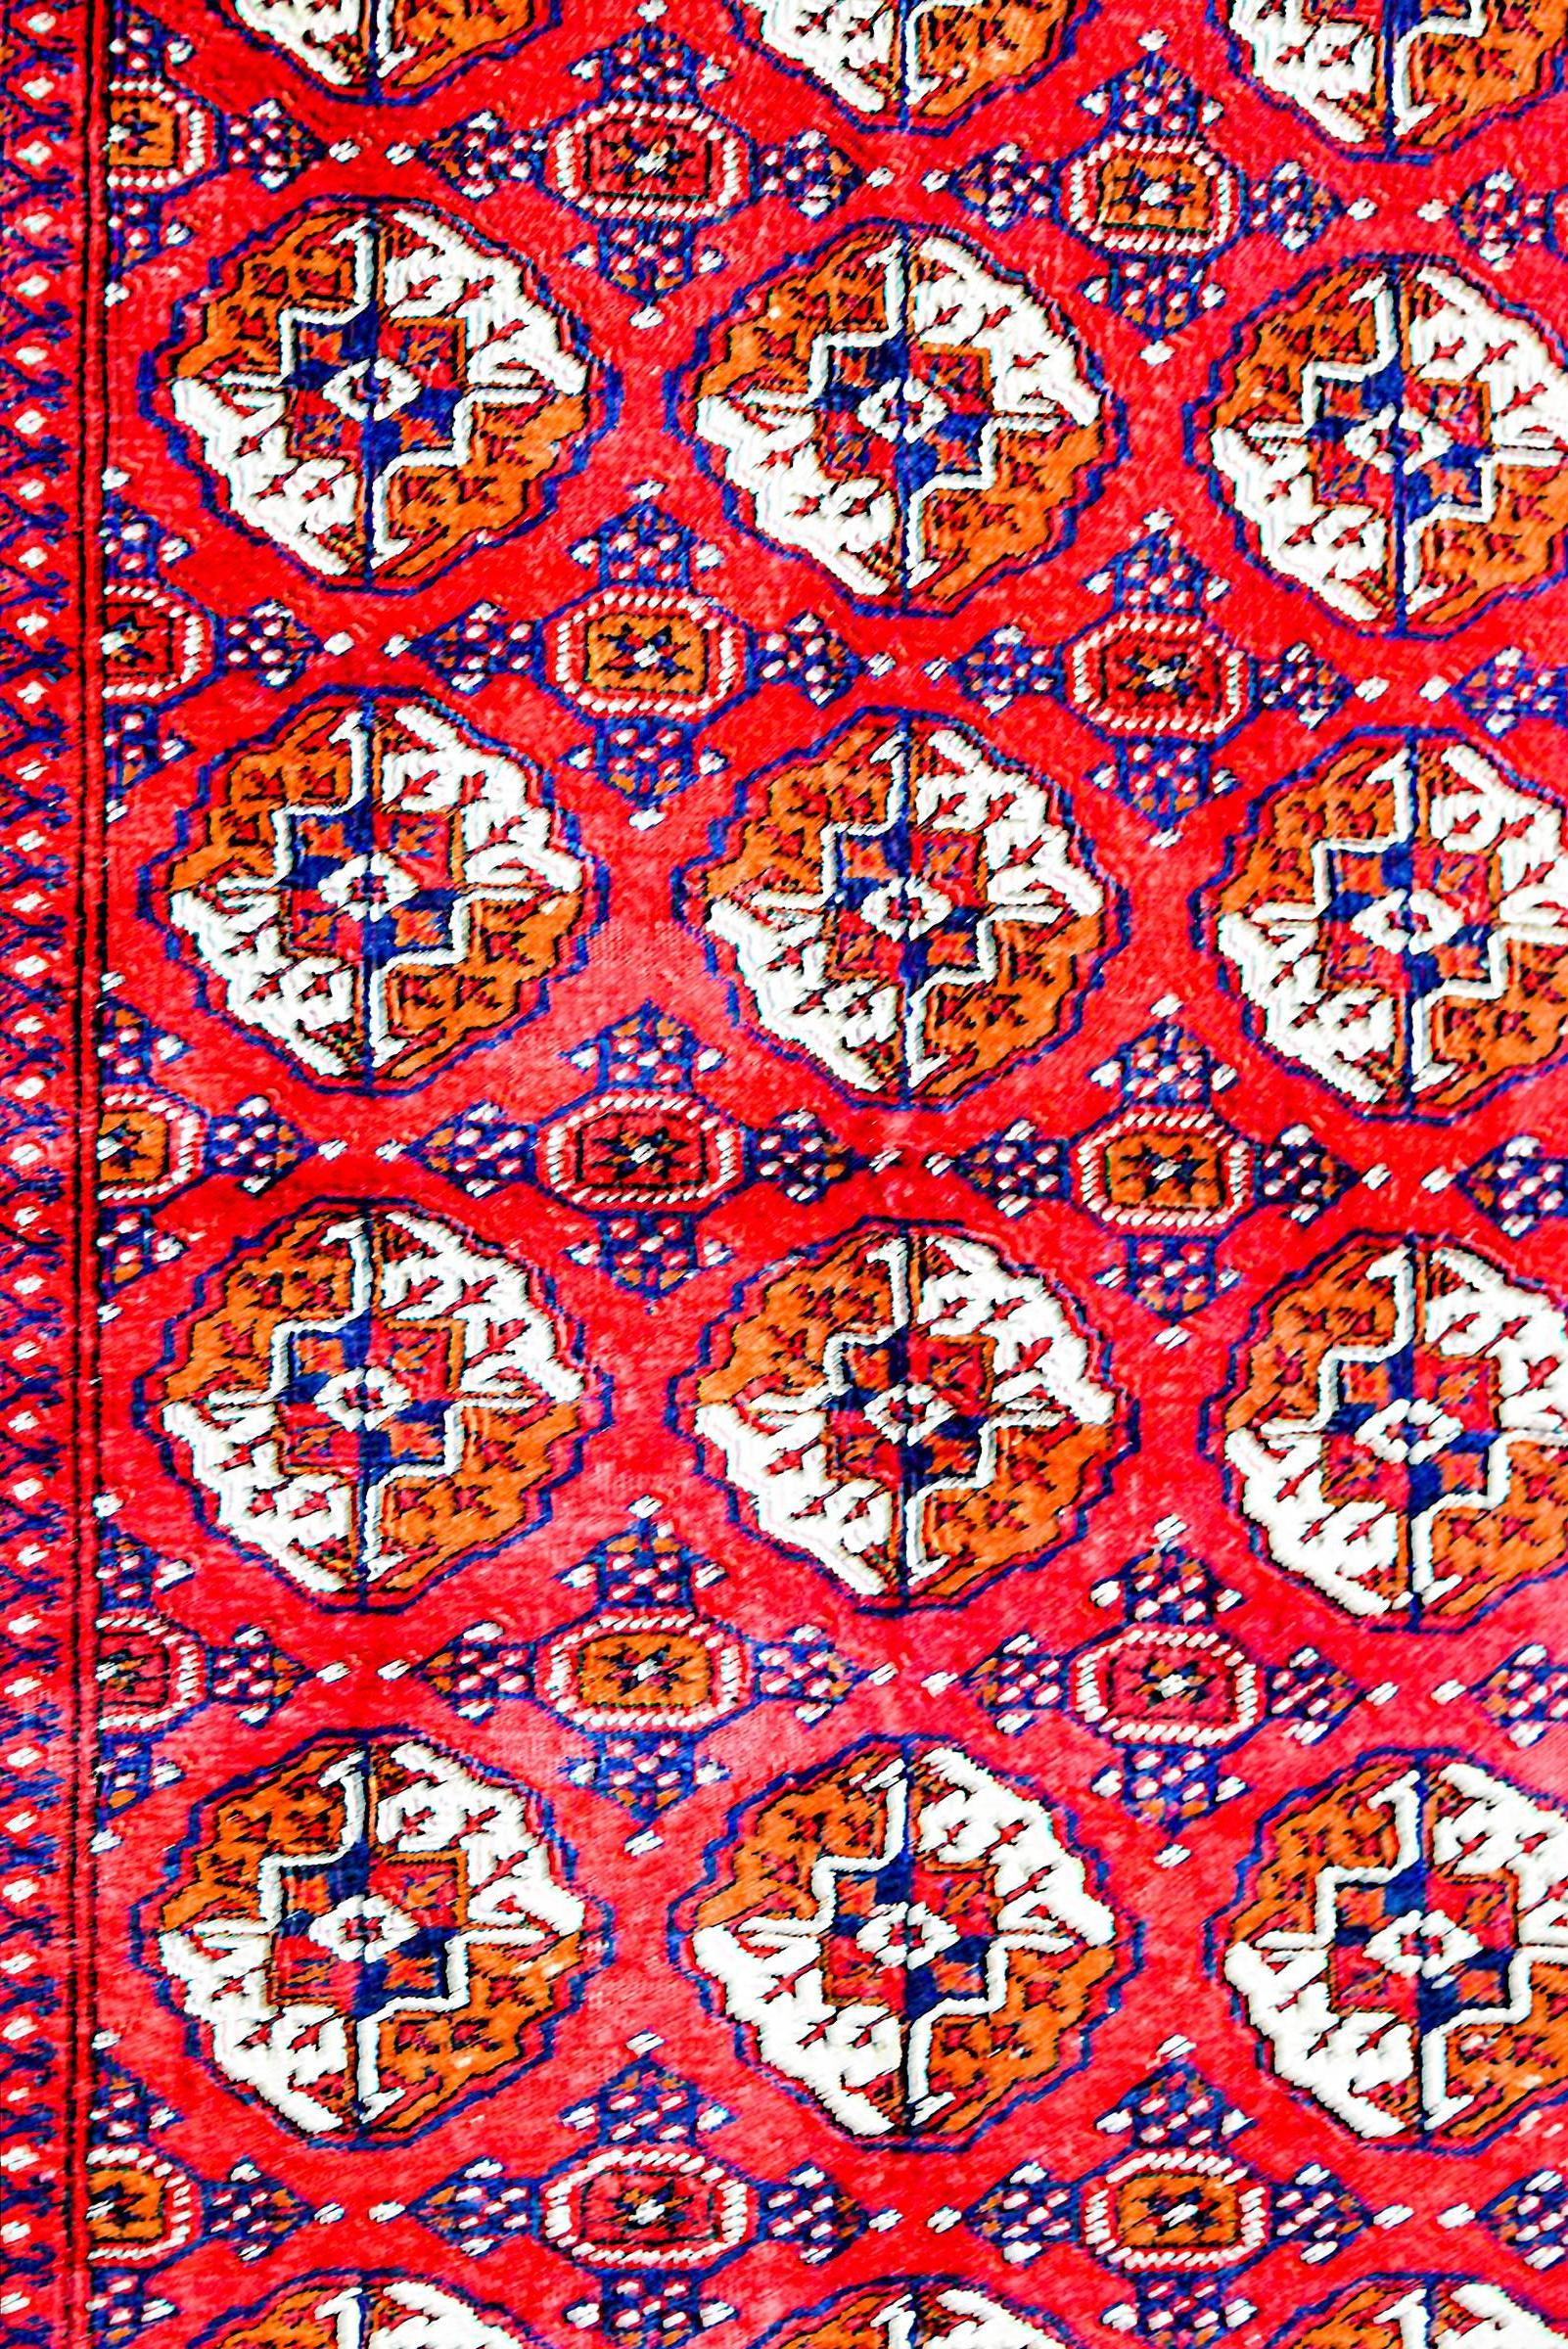 A wonderful vintage silk Turkmen rug with an all-over pattern of small medallions woven in orange, white, and indigo vegetable dyed silk on a brilliant crimson background. The border is fantastic with a wide central floral stripe flanked by multiple